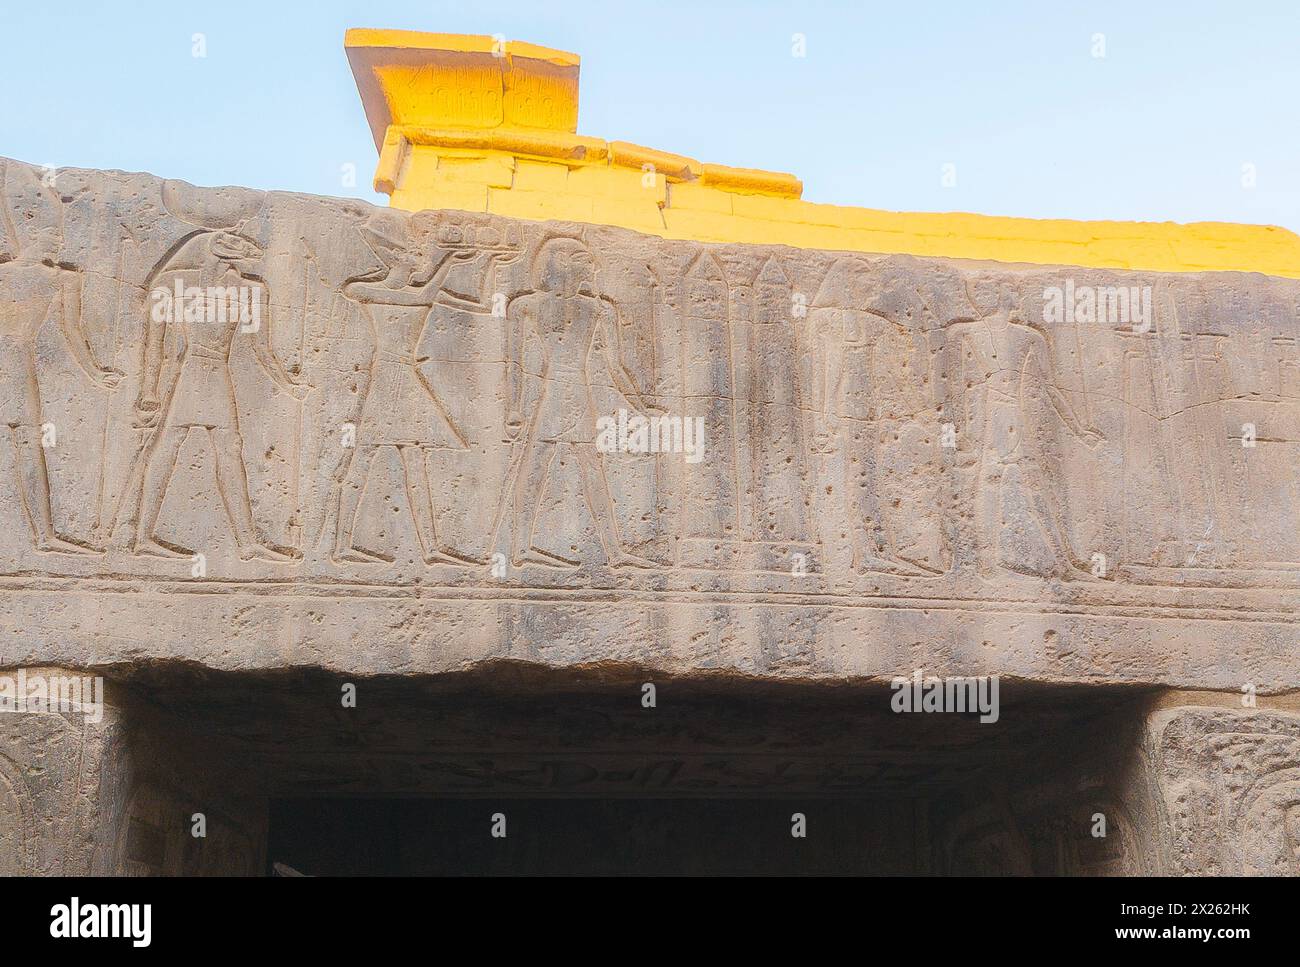 Egypt, Luxor temple, Abu el Haggag mosque, obelisks carved on the architrave. Stock Photo